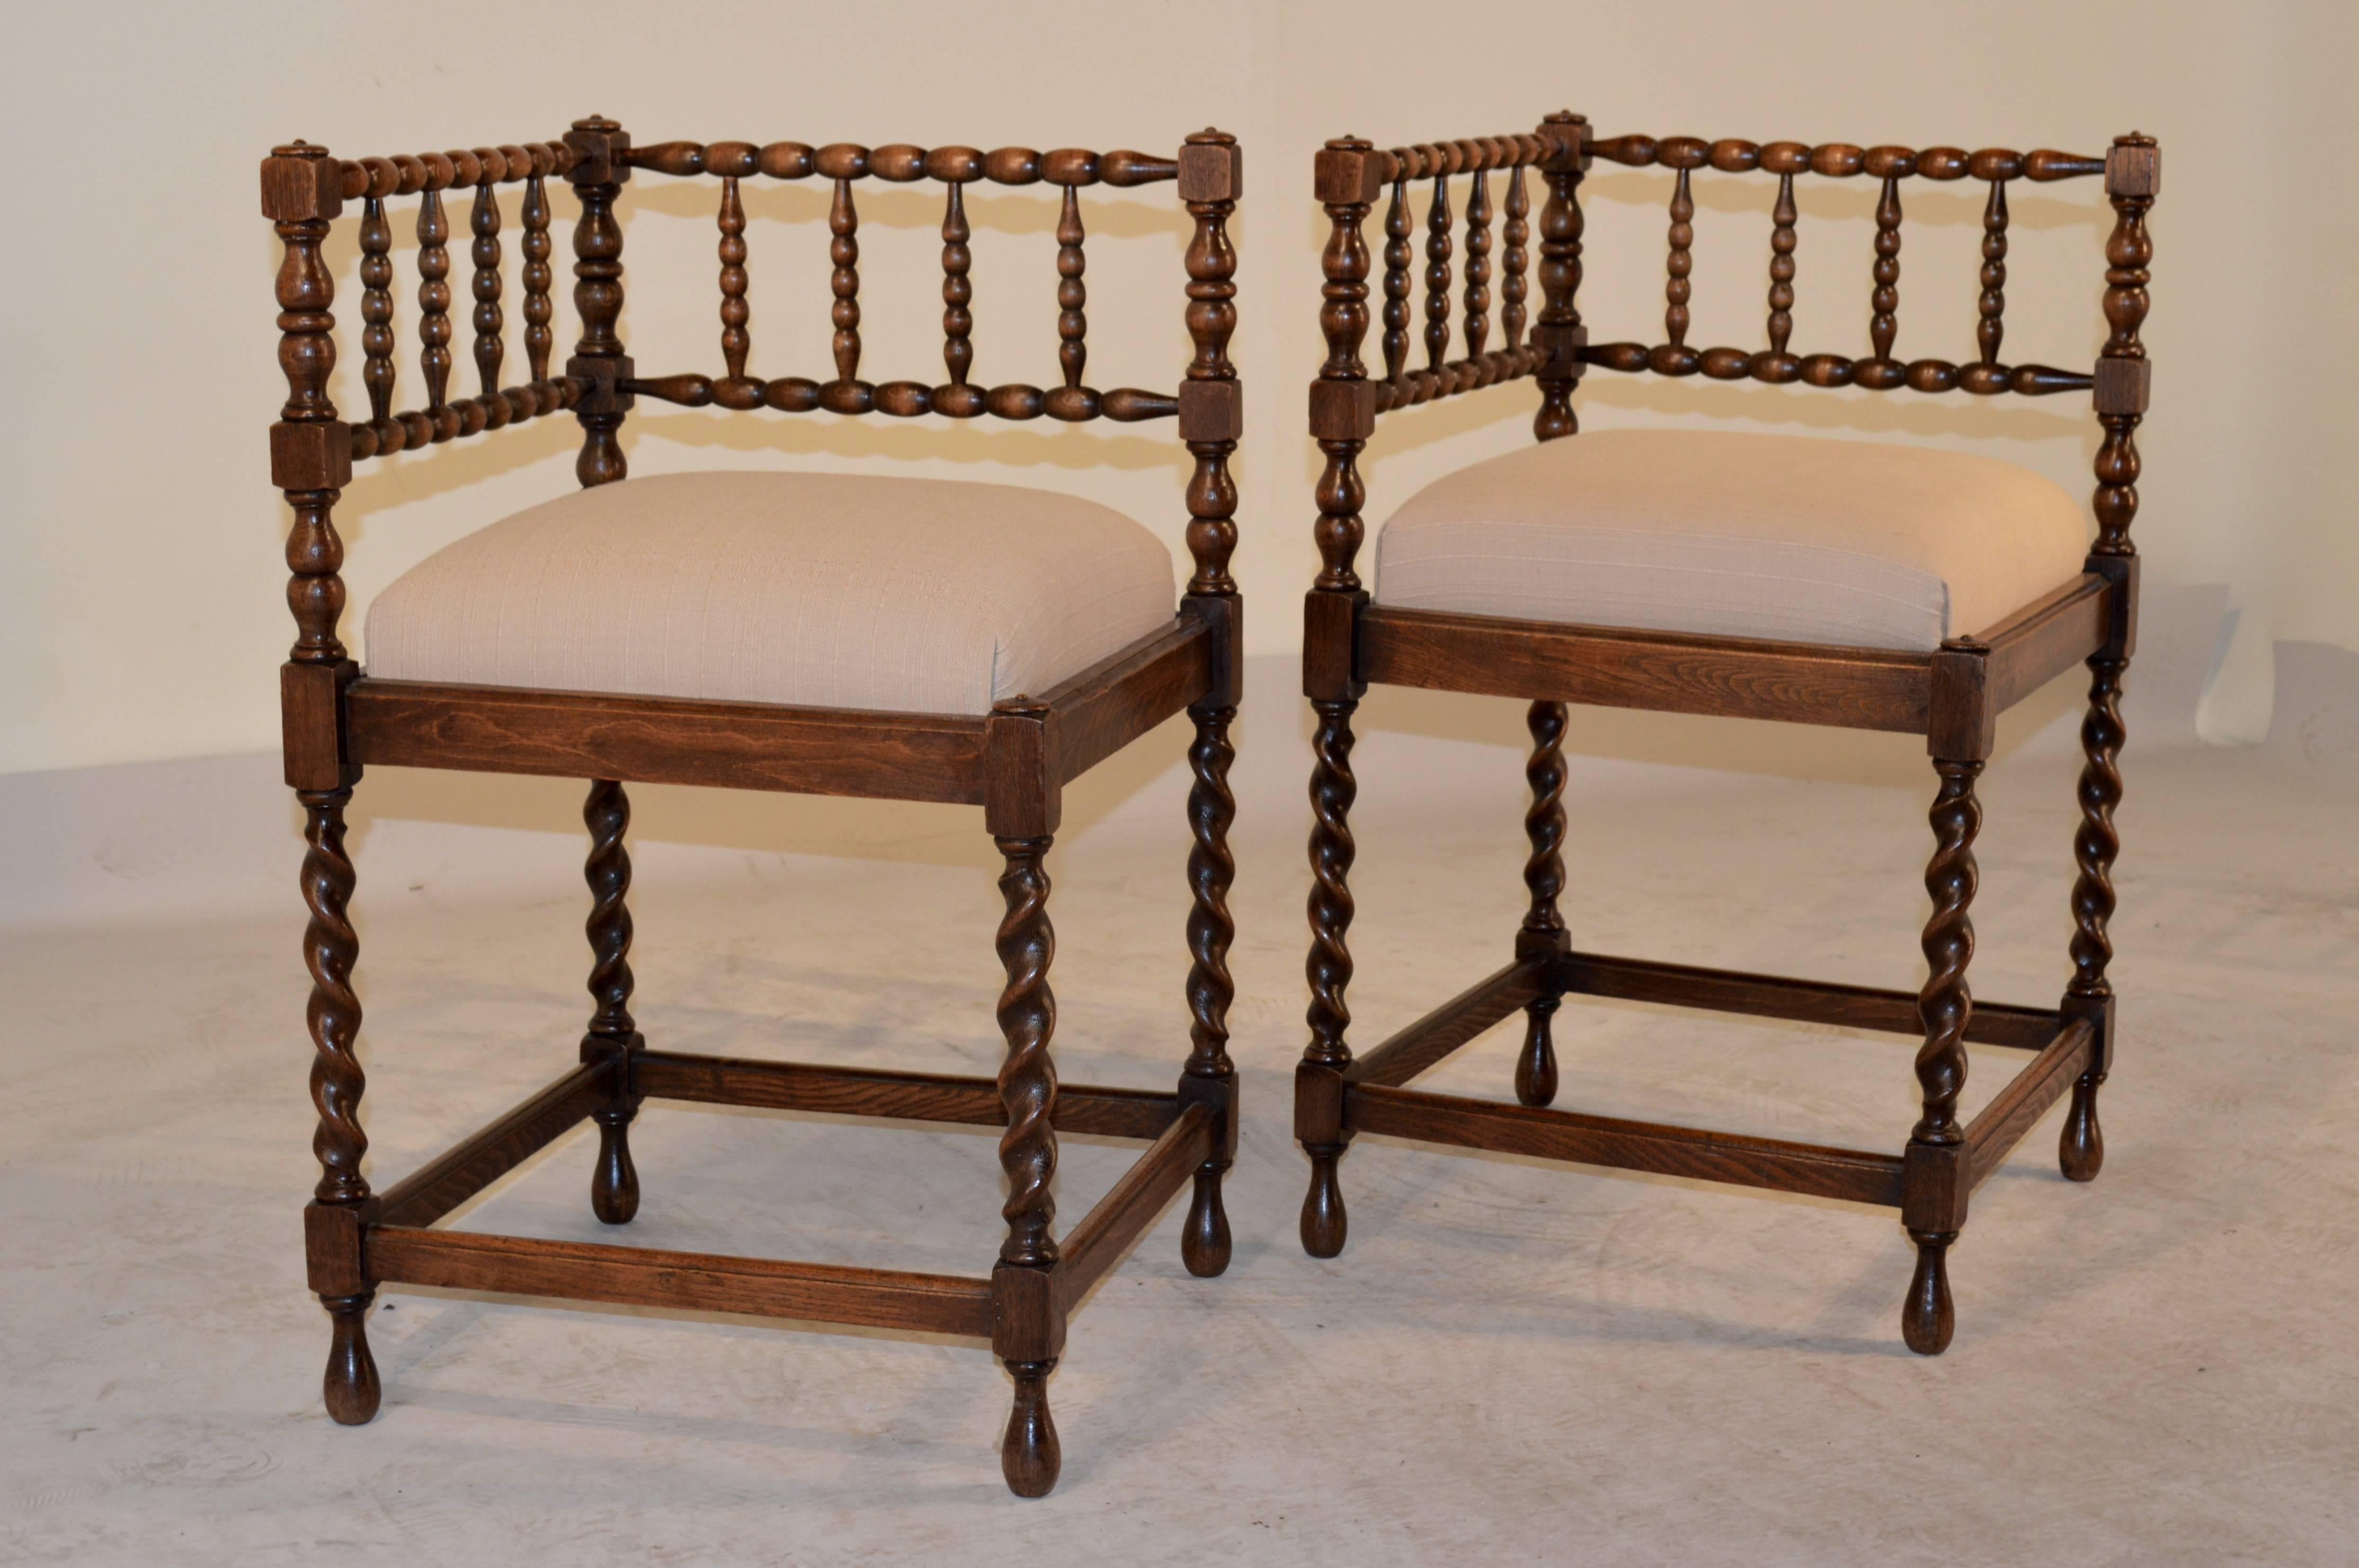 19th Century pair of French corner chairs made from oak.  The backs of the chairs are made up of spool spindles and rails, joined by hand turned pieces.  The legs are hand turned barley twist, and are joined by stretchers and raised on turned feet. 